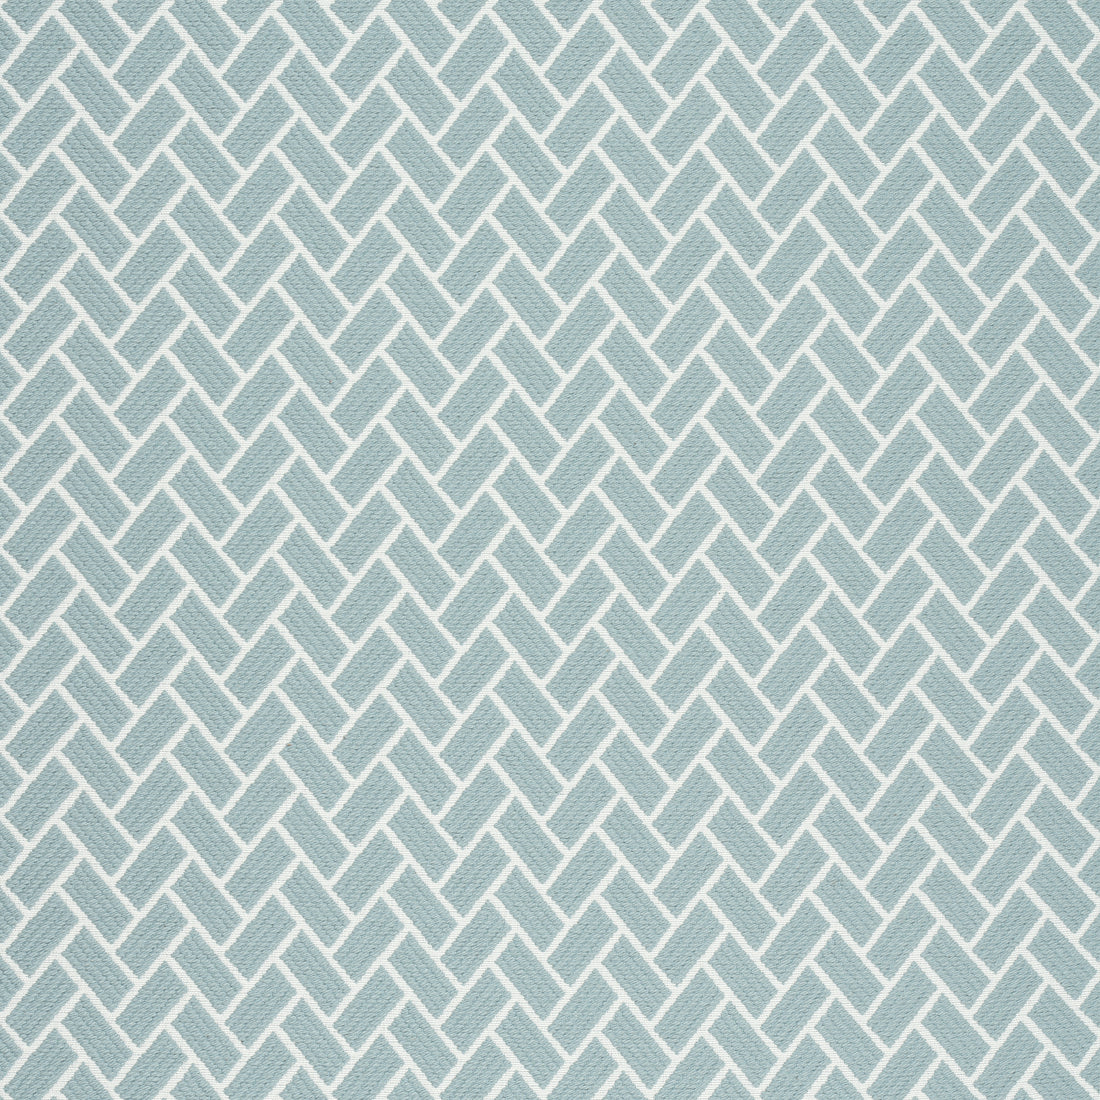 Cobblestone fabric in seaglass color - pattern number W74216 - by Thibaut in the Passage collection